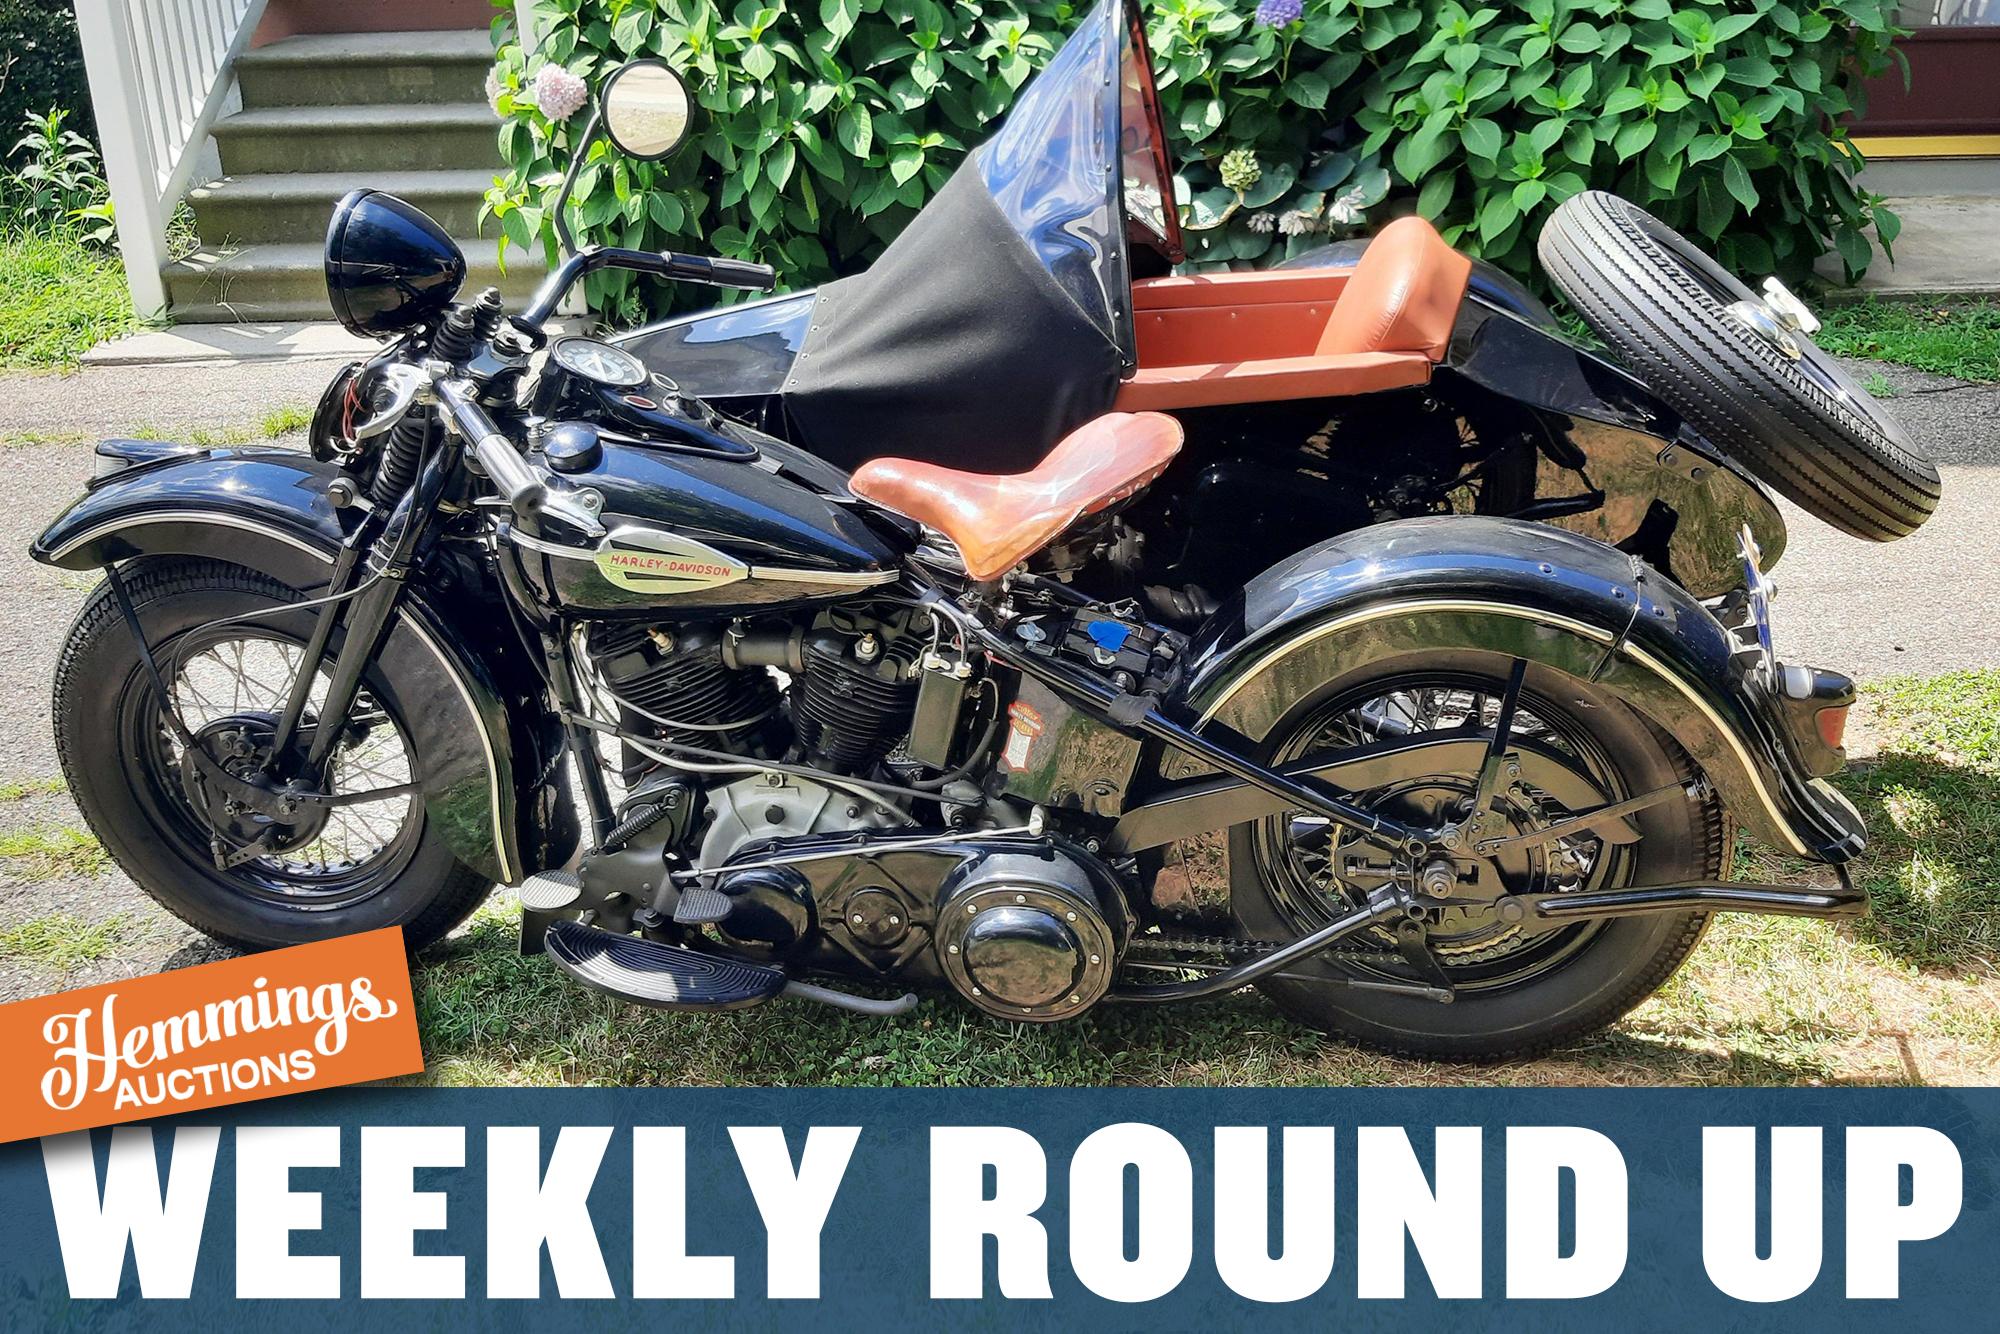 A restored Harley-Davidson and sidecar, big-selling Dodge Power Wagon, and a porthole-topped '57 Thunderbird: Hemmings Auctions Weekly Round Up for September 11-17, 2022